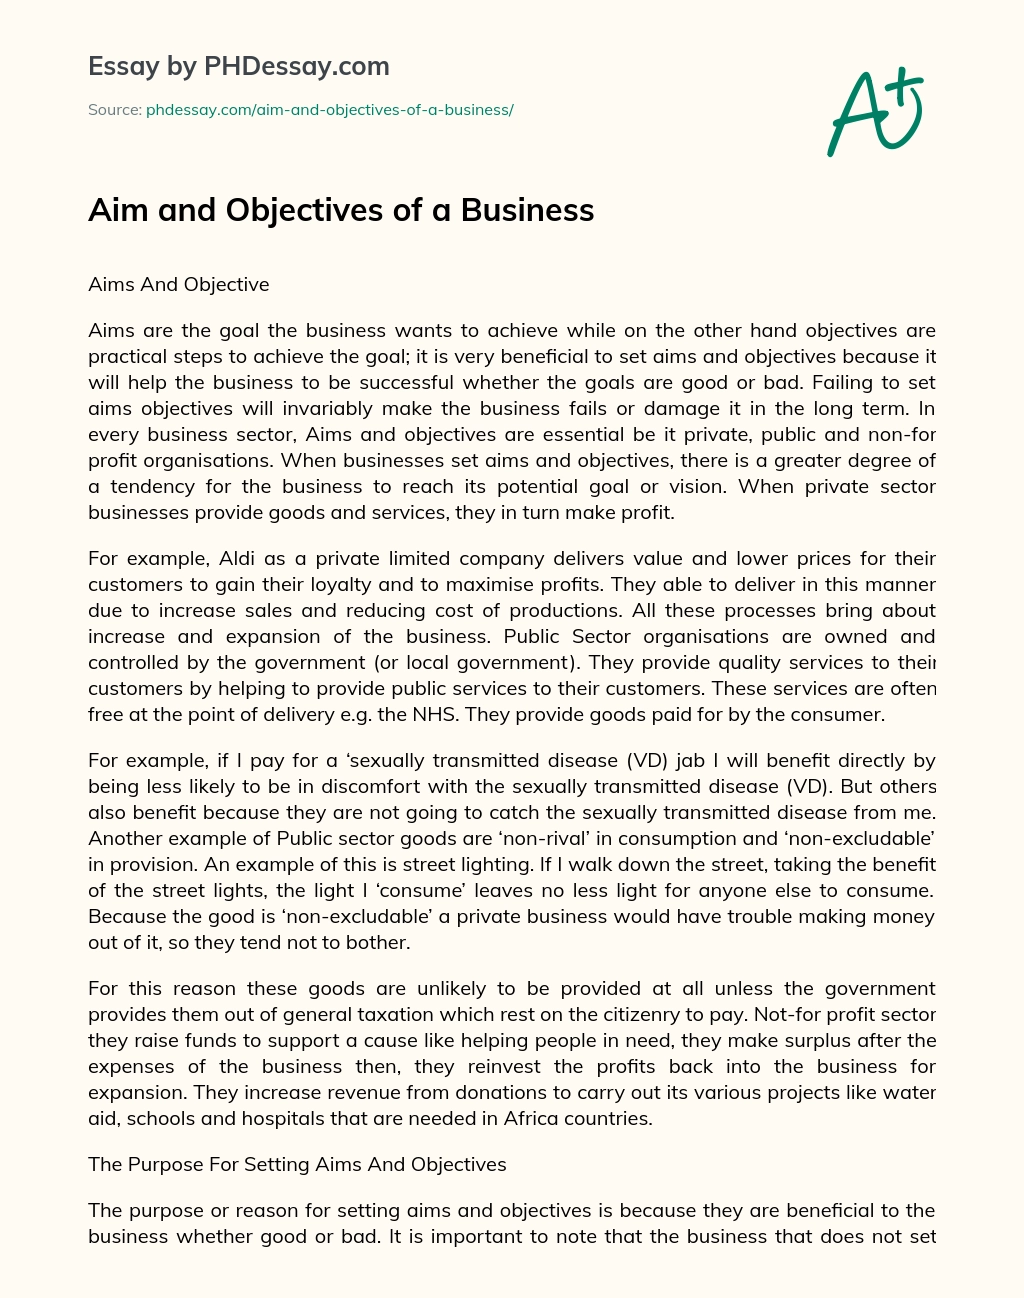 Aim and Objectives of a Business essay